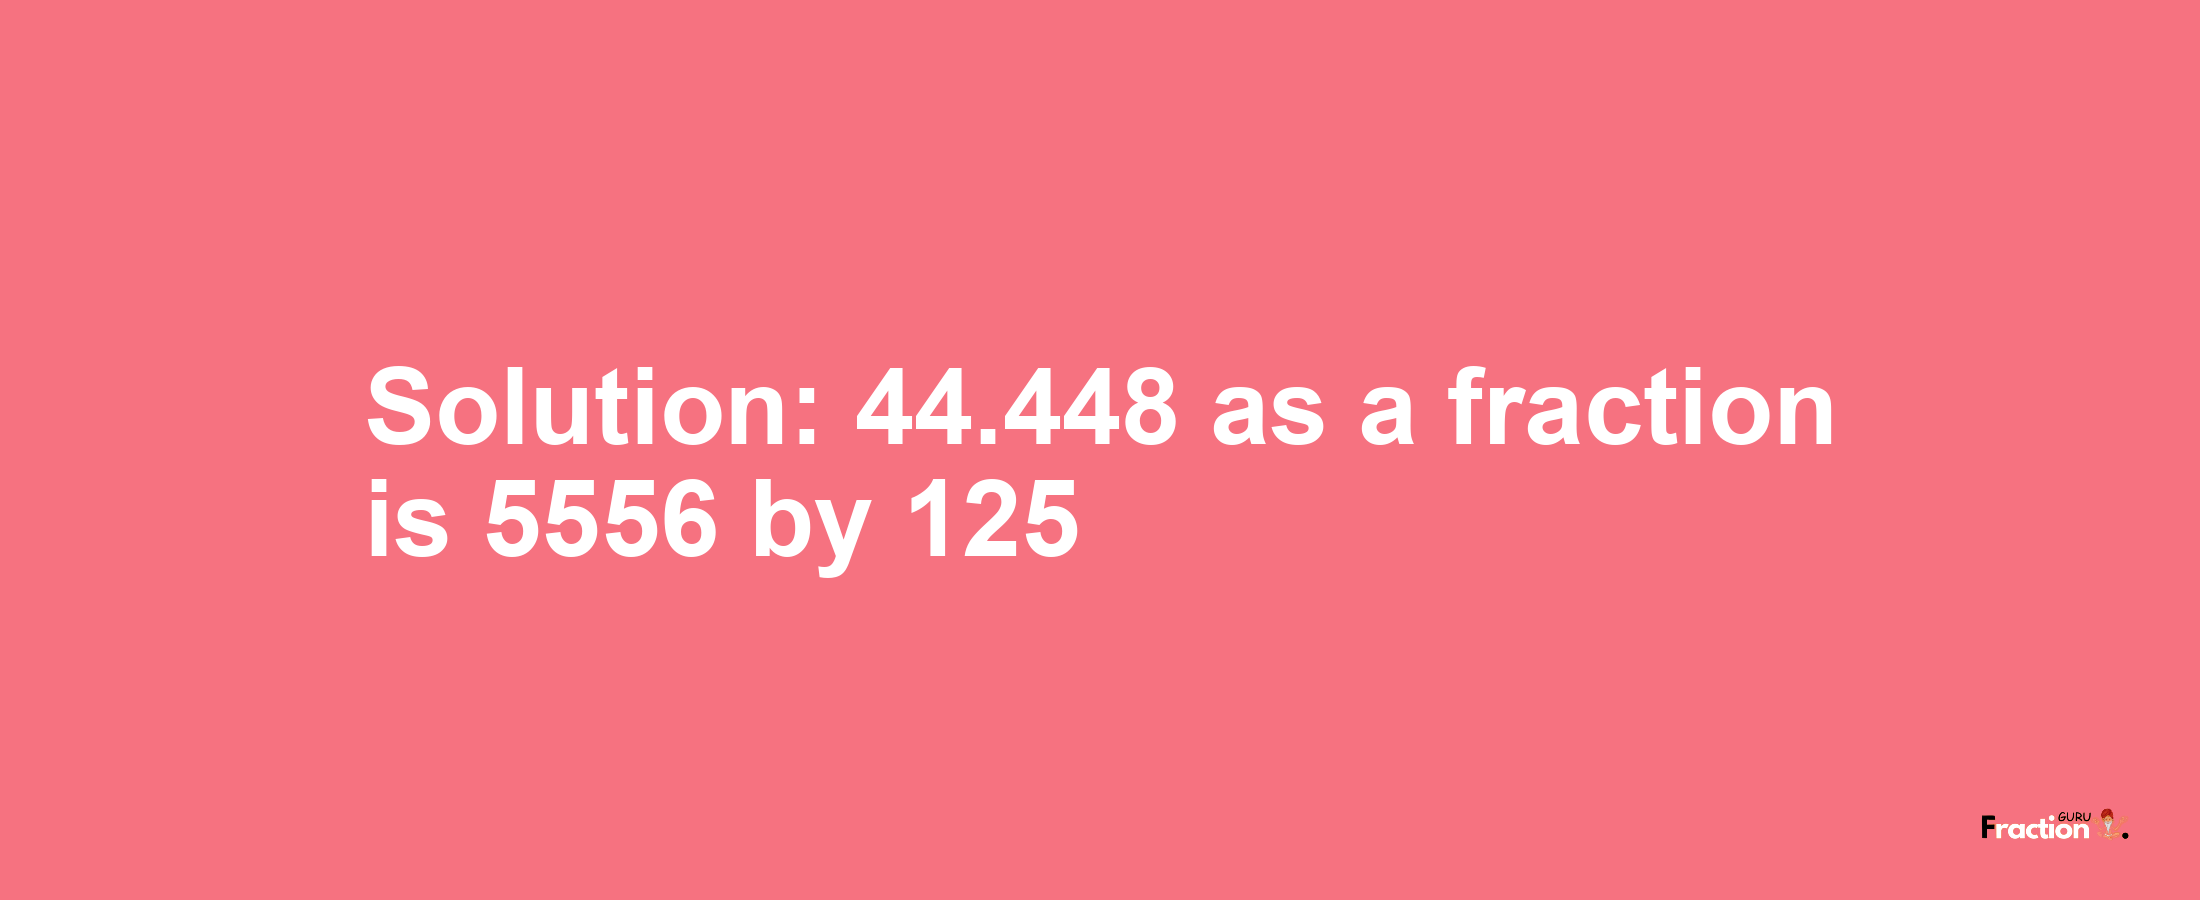 Solution:44.448 as a fraction is 5556/125